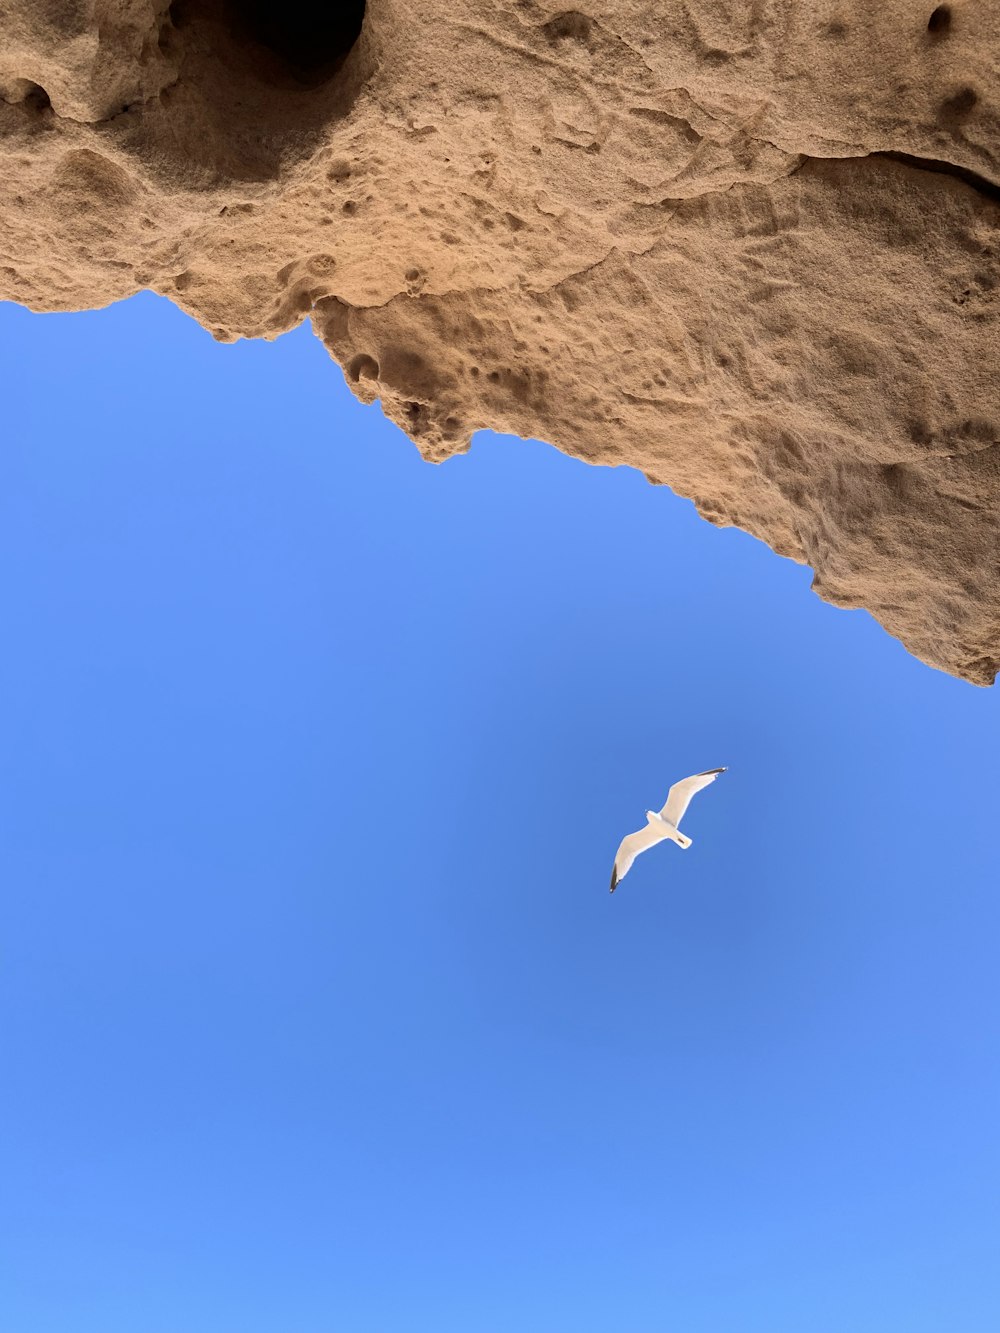 white bird flying over brown rocky mountain during daytime